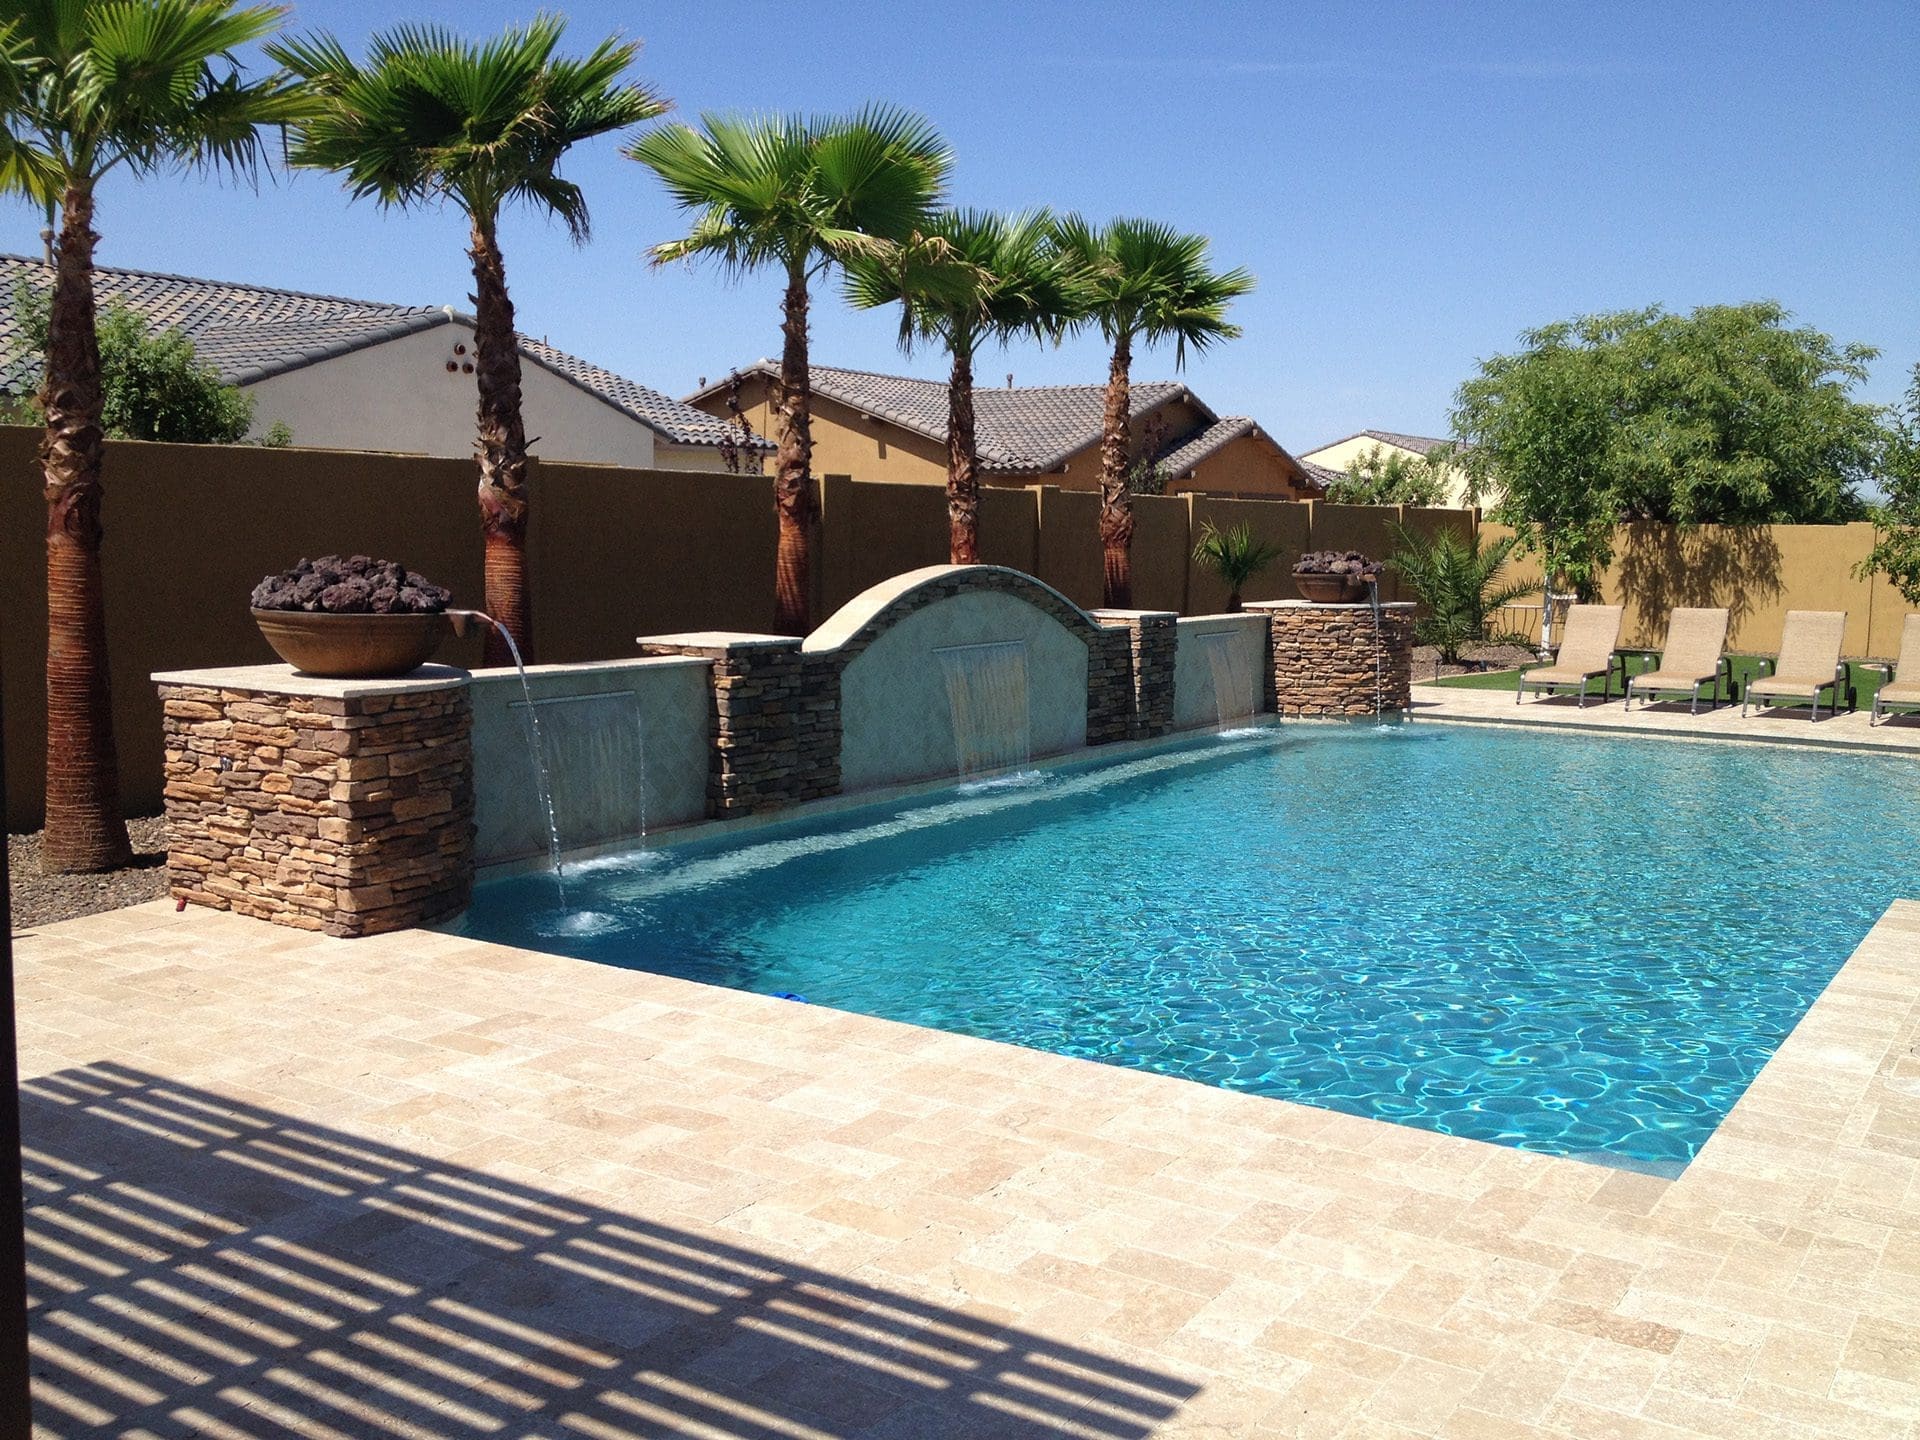 An Arizona Pool Builder's Additional Projects - No Limit Pools